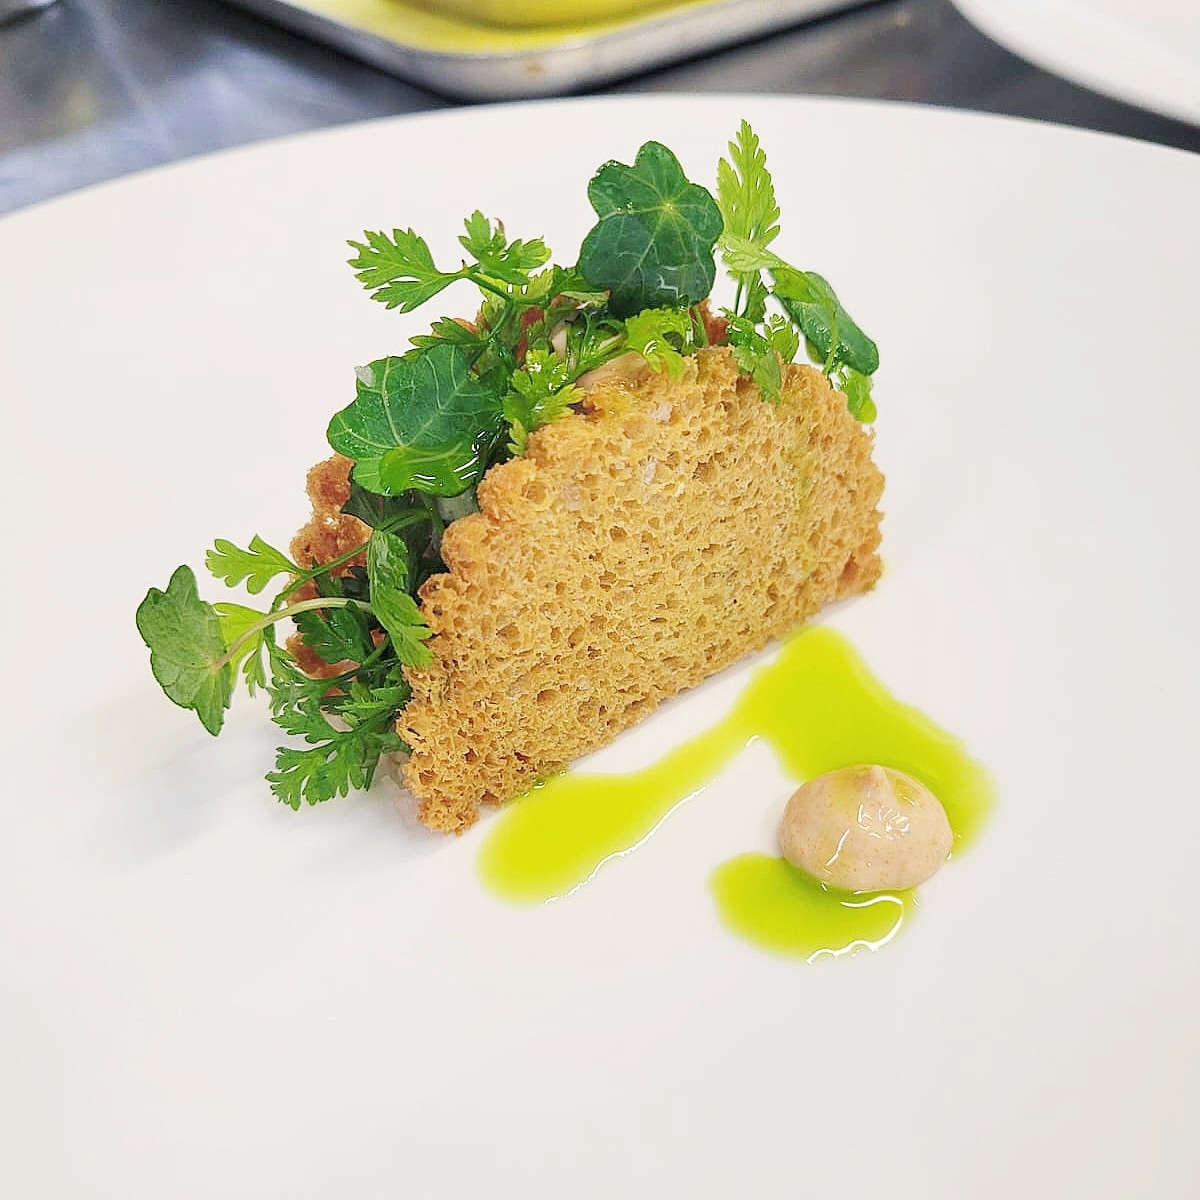 'Crab on toast' / whitby crab / chervil / brioche Quick pass shot of our crab on toast. Potted whitby crab, whipped head meat, chervil, nasturtium & mignonette dressing, finished with brioche wafers. • #passionate #brigade #foodie #textures #flavours #cookery #chefslife #pass